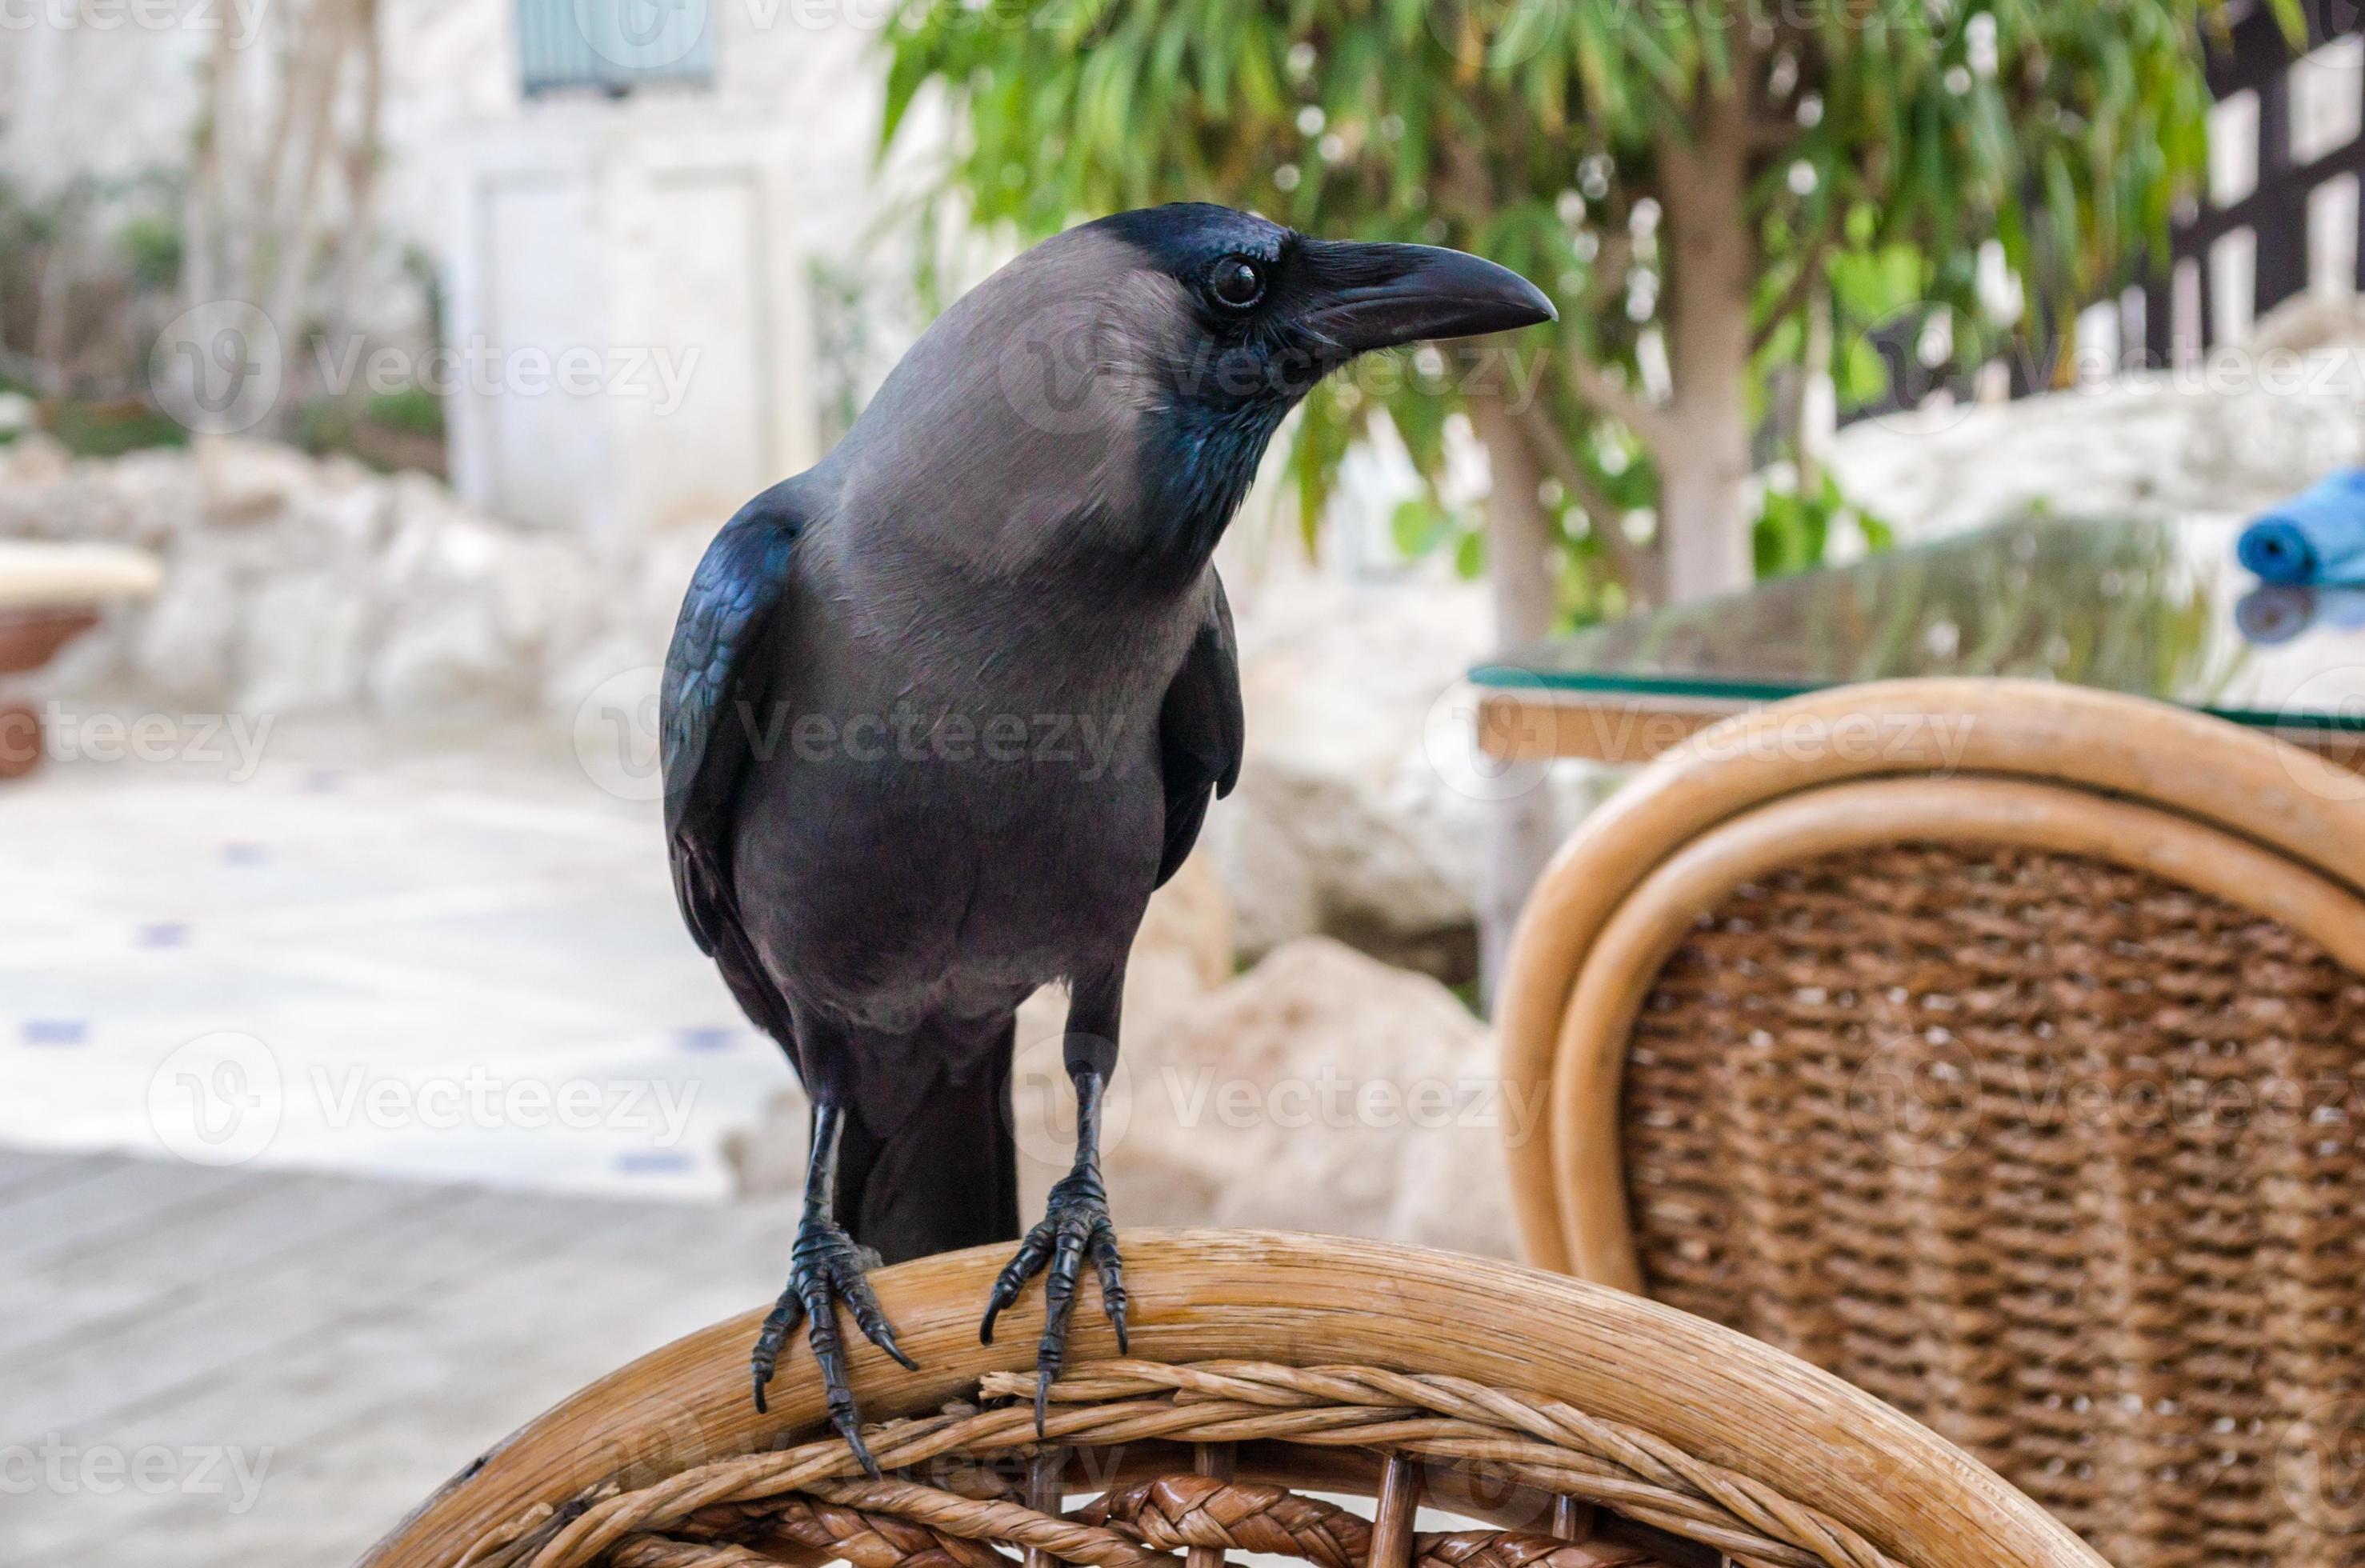 Big Raven Profile Stock Photo, Picture And Royalty Free Image. Image  65686324.